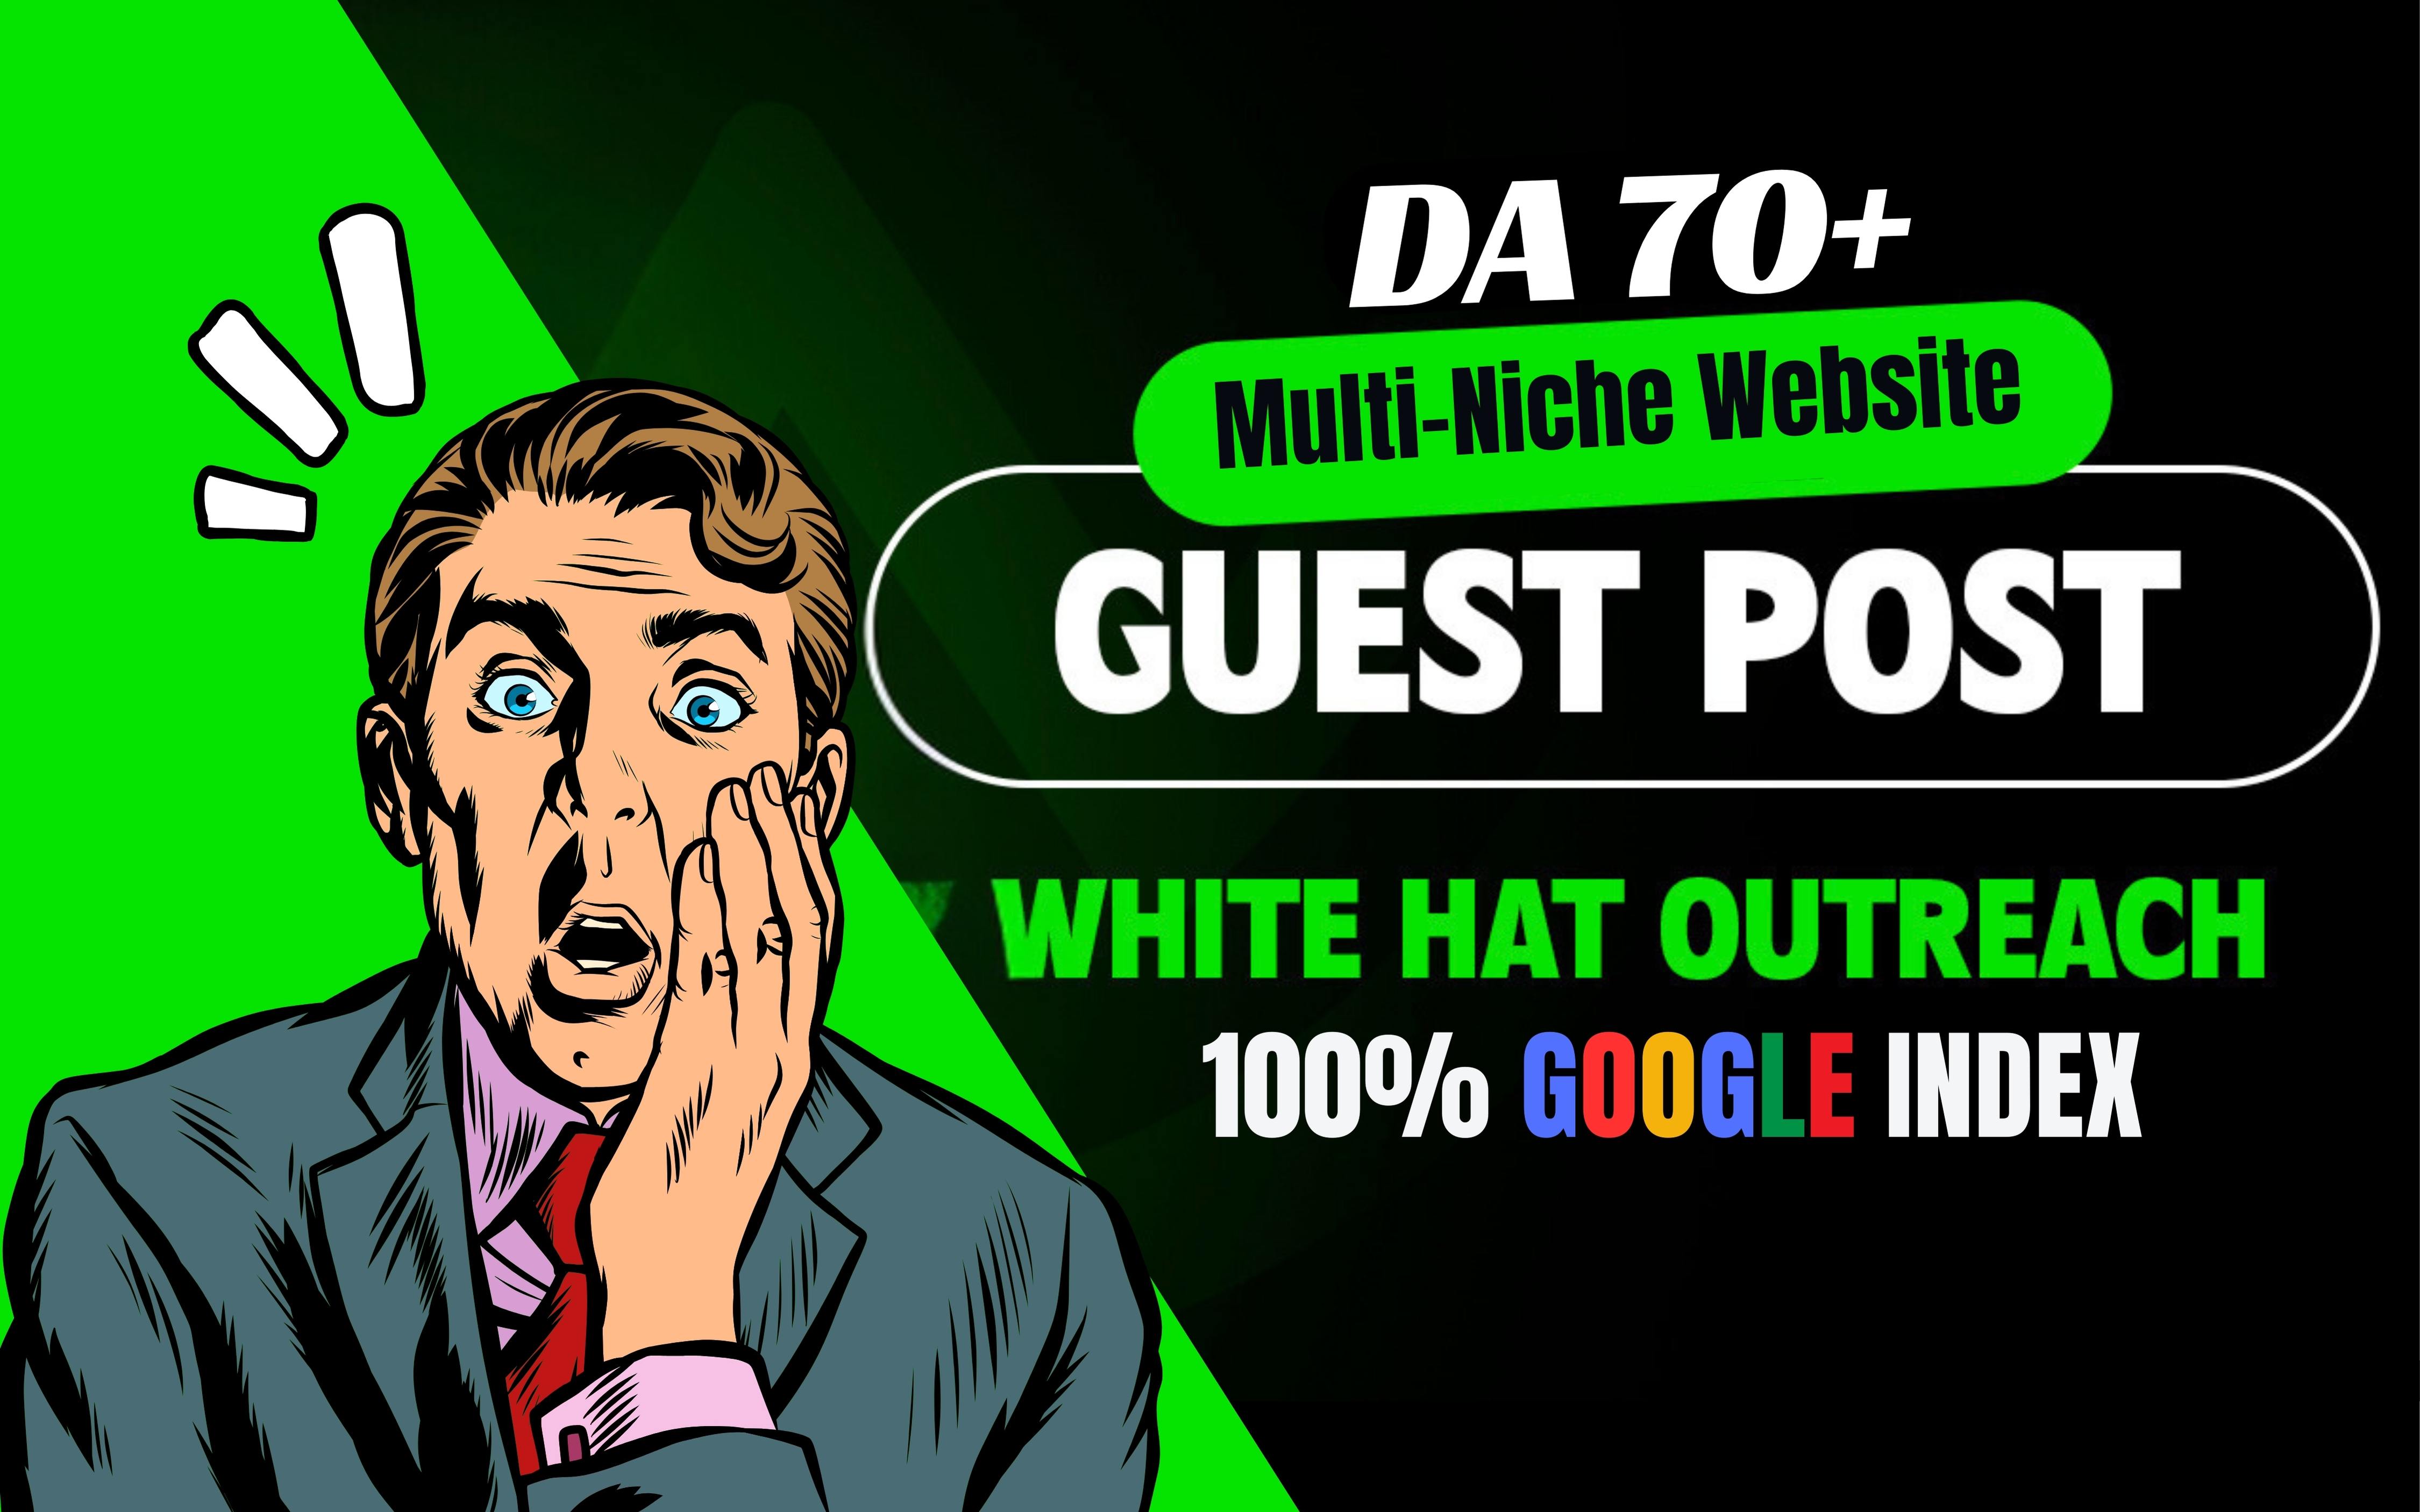 I Will Write And Publish 10 SEO Premium Guest Posts In High DA Websites